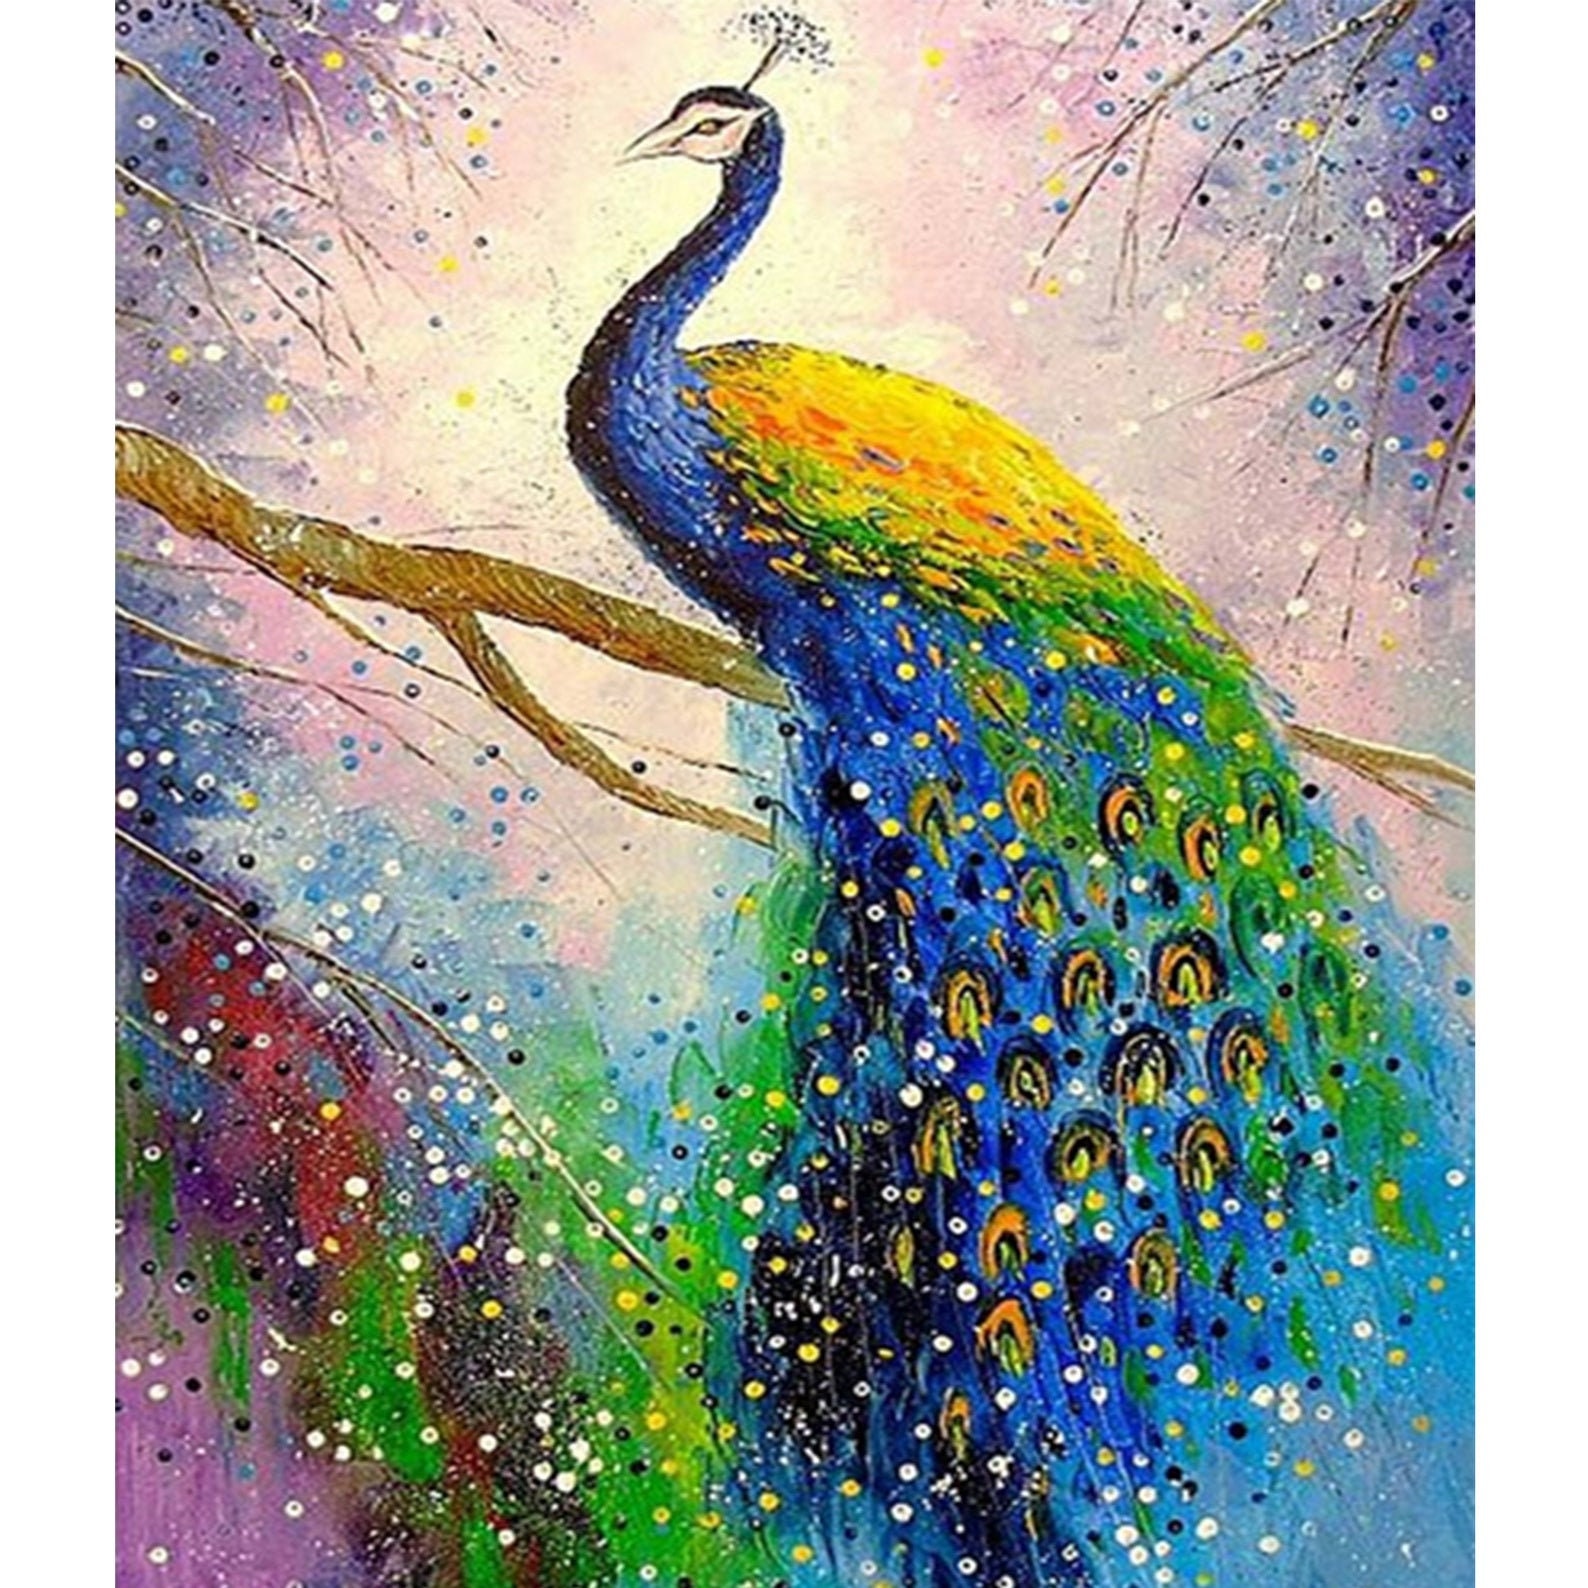 16x20inch Special Shaped Diamond Painting DIY 5D Partial Drill Cross Stitch Kits Crystal Rhinestone of Picture Serial Diamond Embroidery Arts Craft Owl with Peacock Feathers